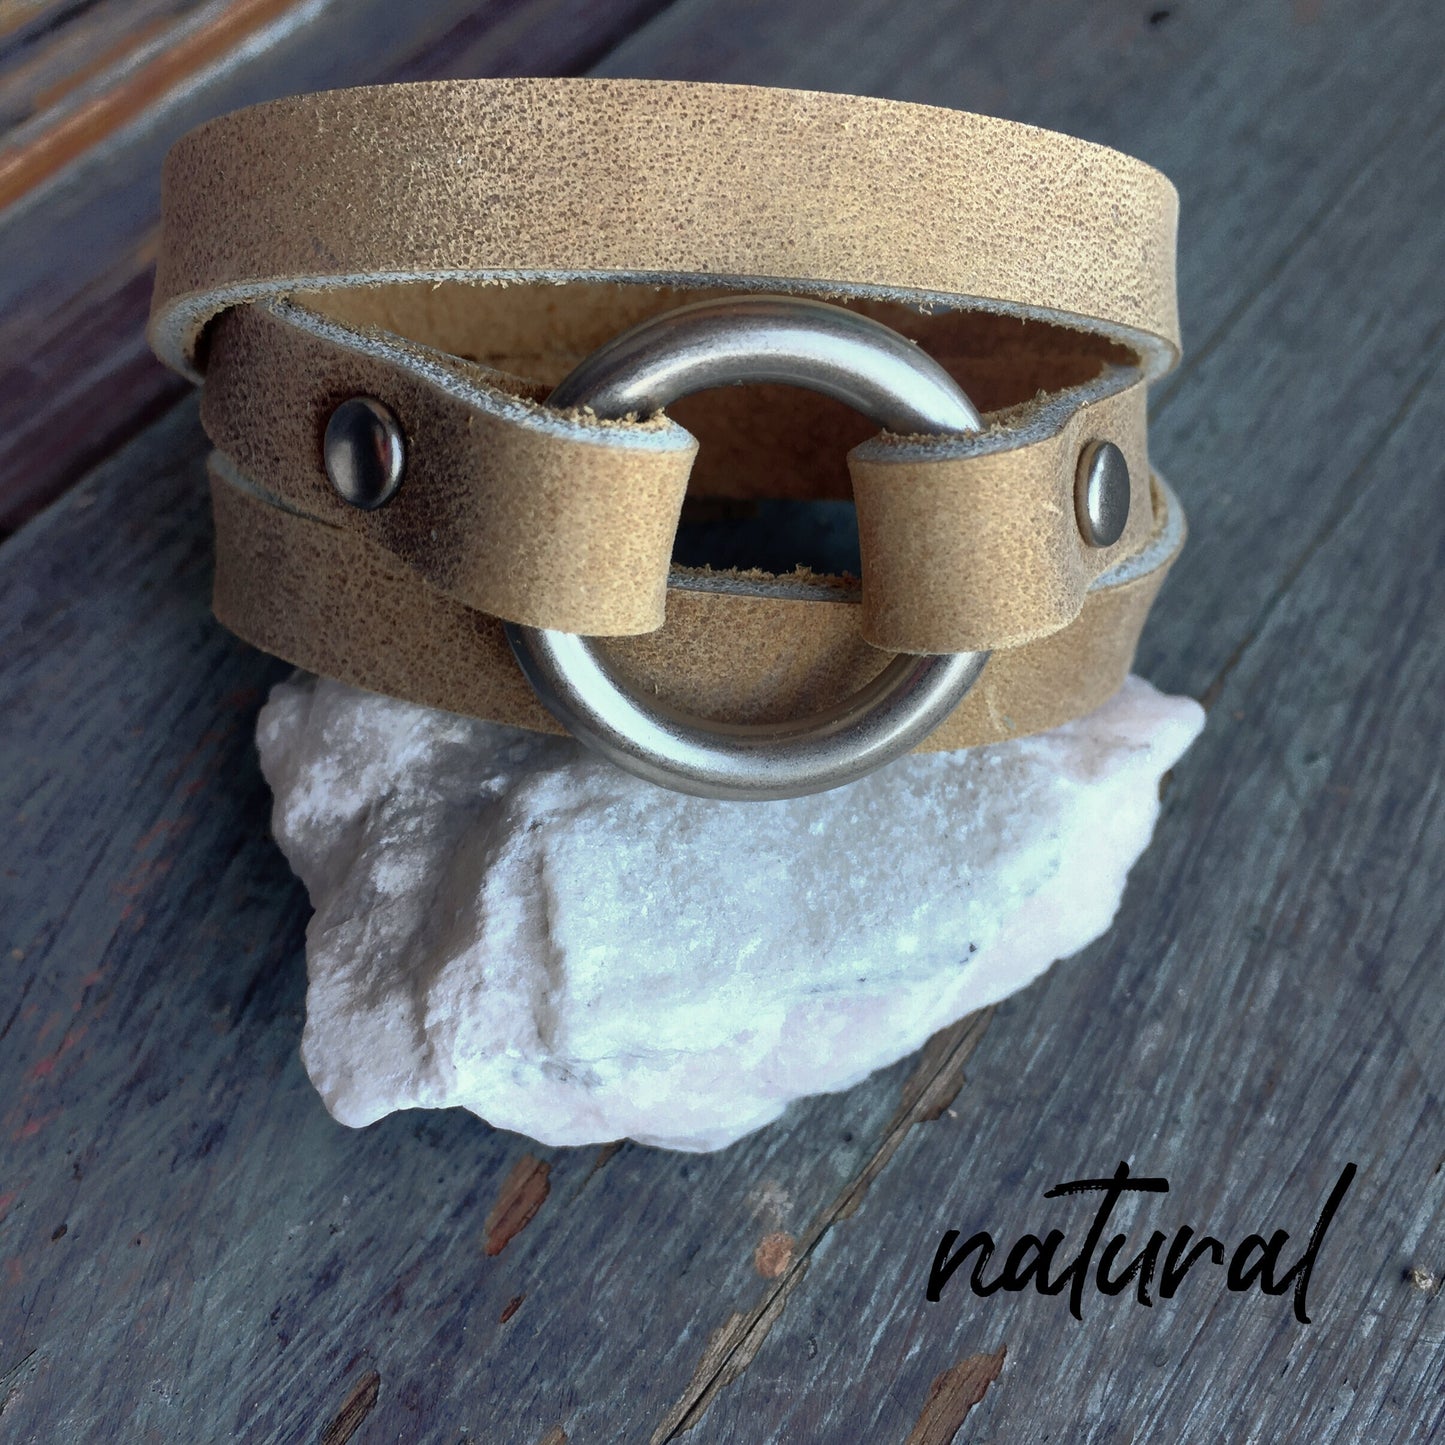 Leather wrap bracelet, Womens leather wrap bracelet, Leather wrap bracelet for women, Bracelet for women, Leather jewelry, Anniversary gift